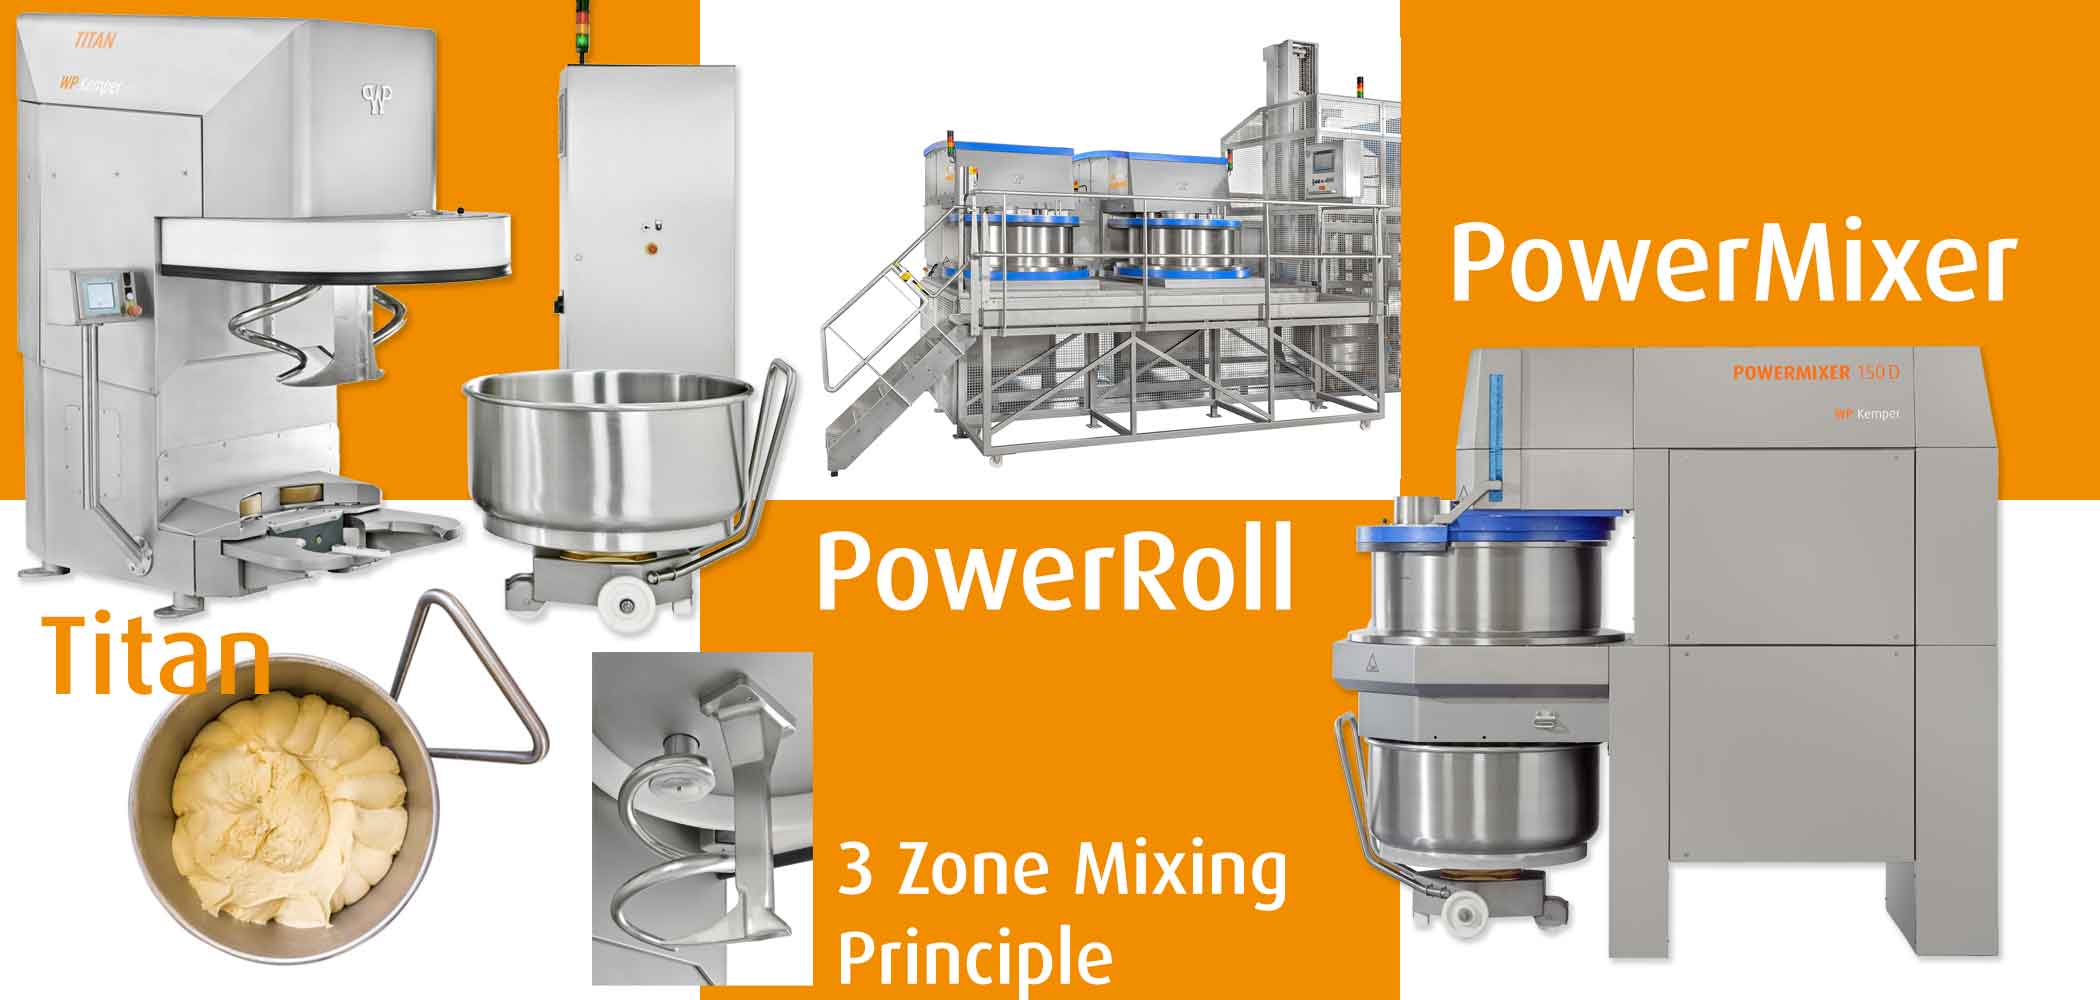 WP Bakery Group USA Industrial Mixing